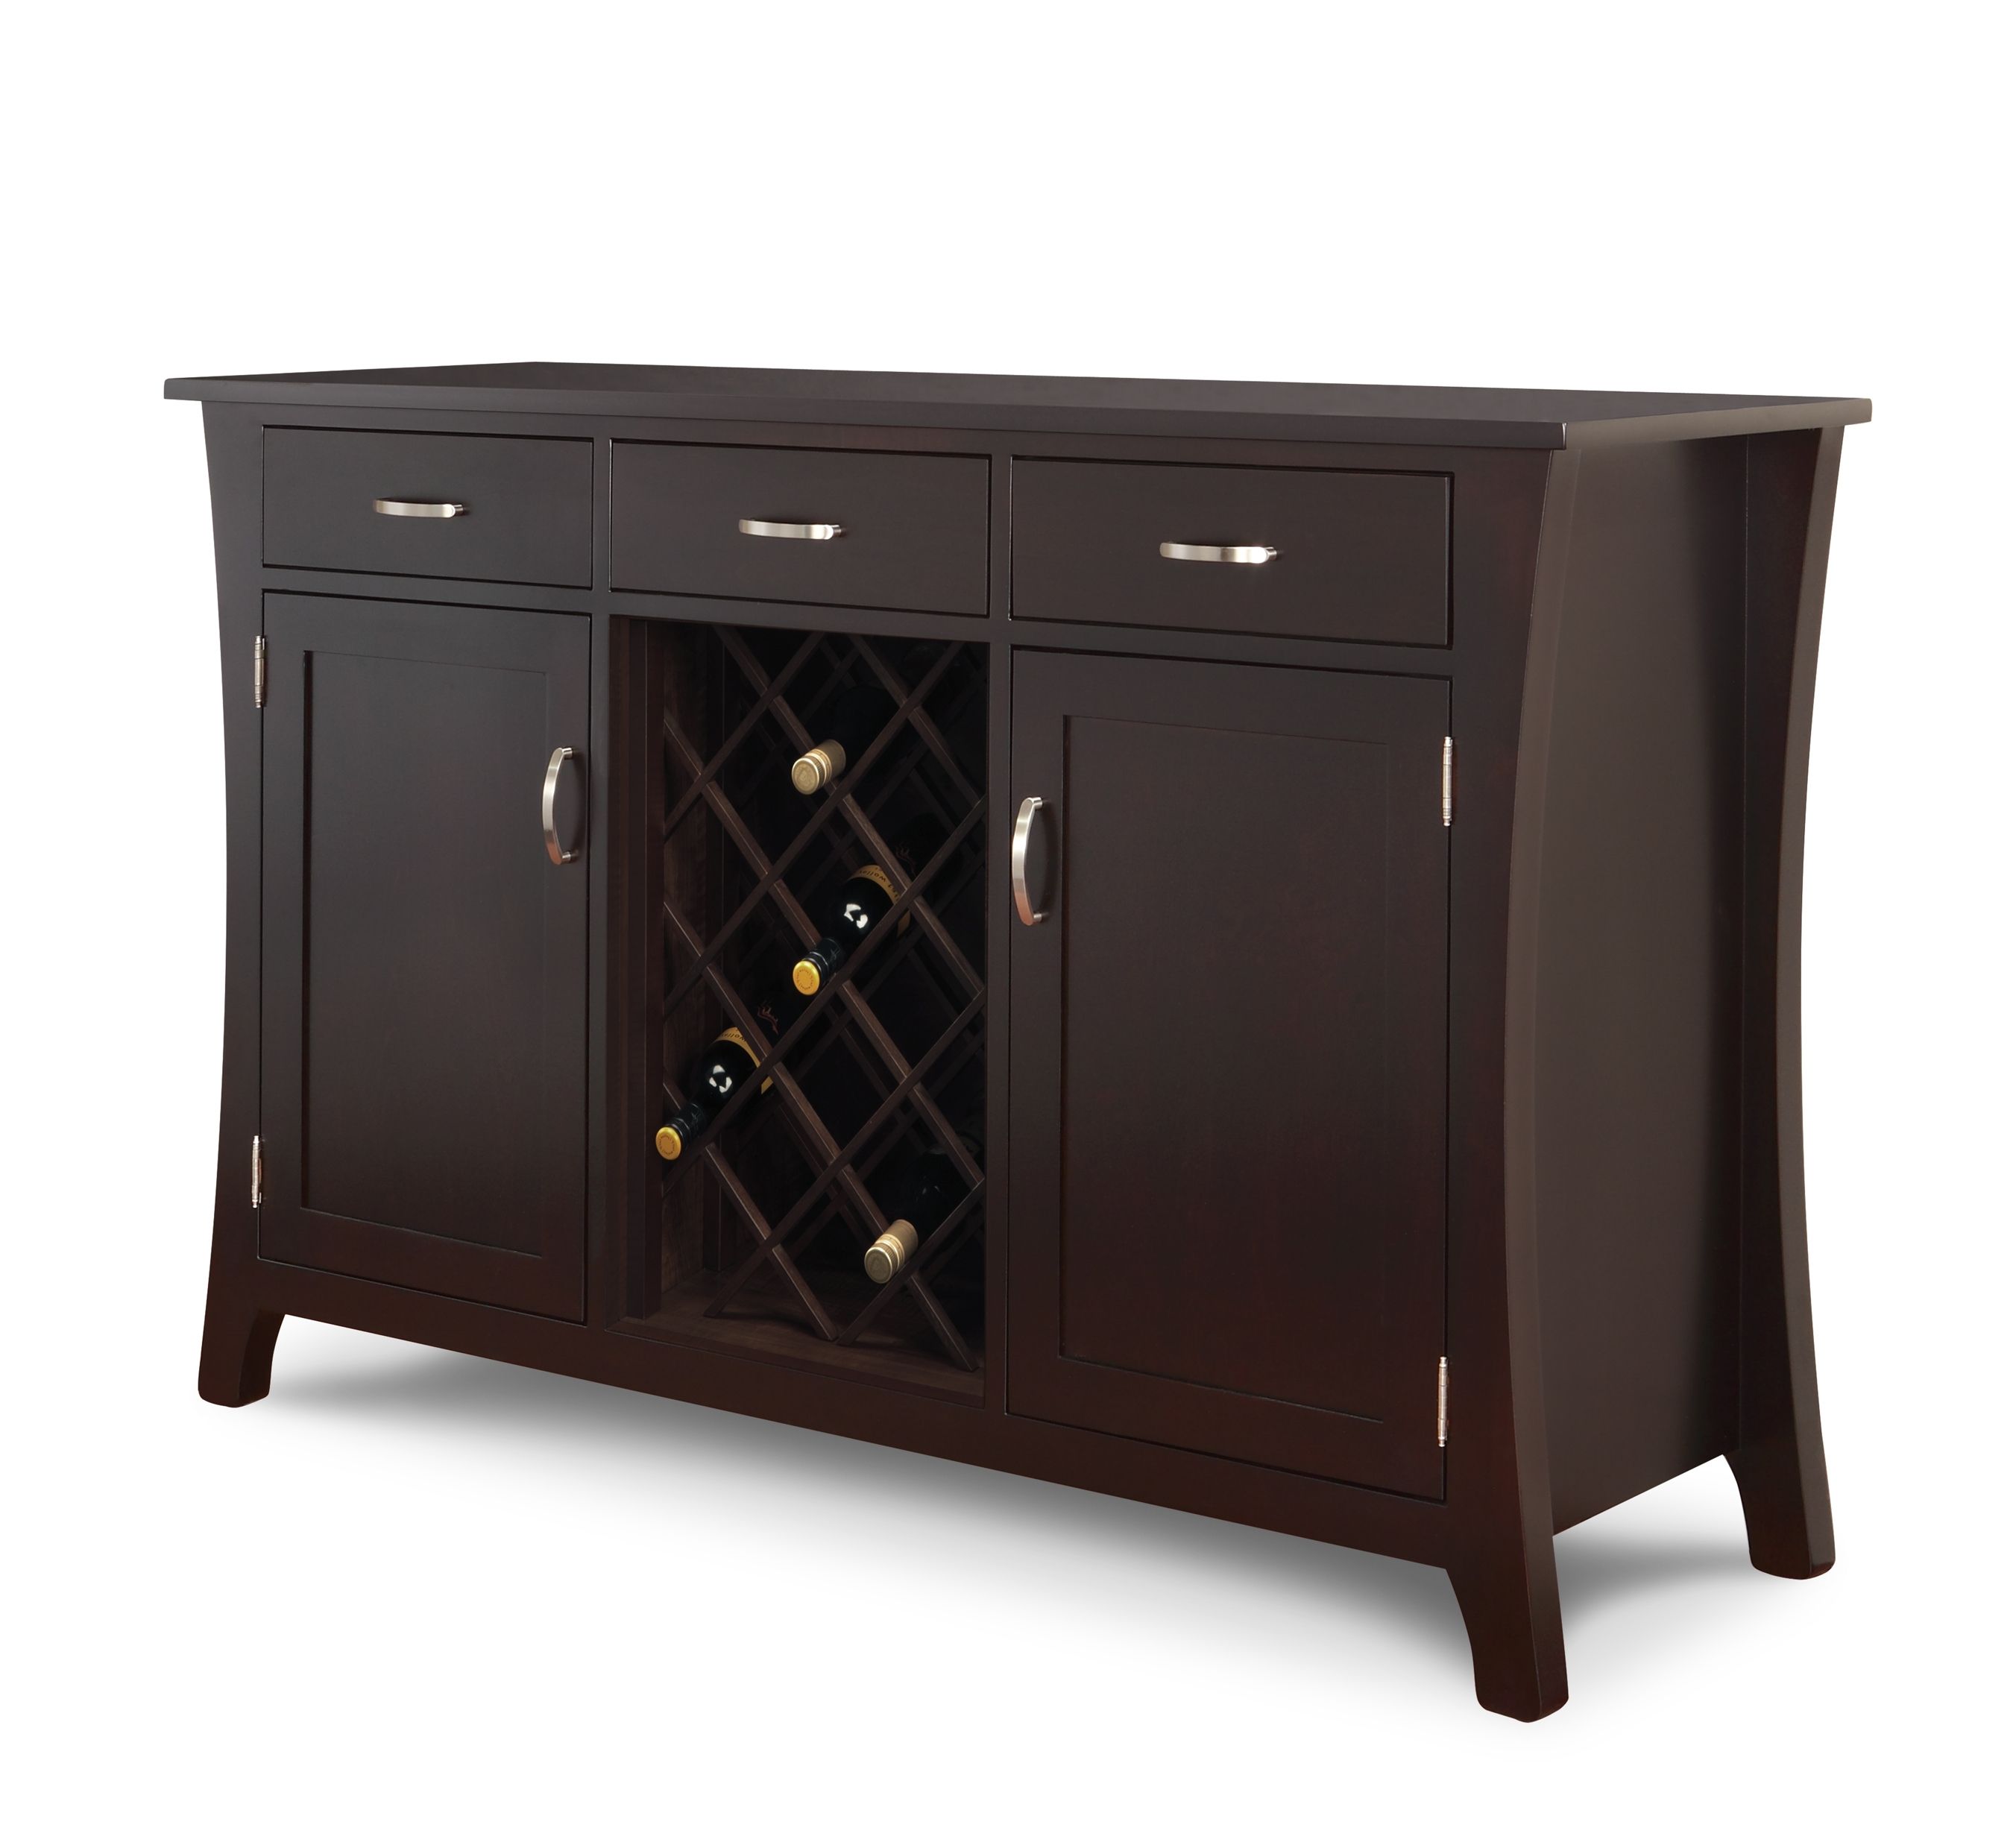 Lexington Sideboard | Woodcraft Solid Wood Furniture | Toronto Canada In Most Recently Released Antique Walnut Finish 2 Door/4 Drawer Sideboards (View 18 of 20)